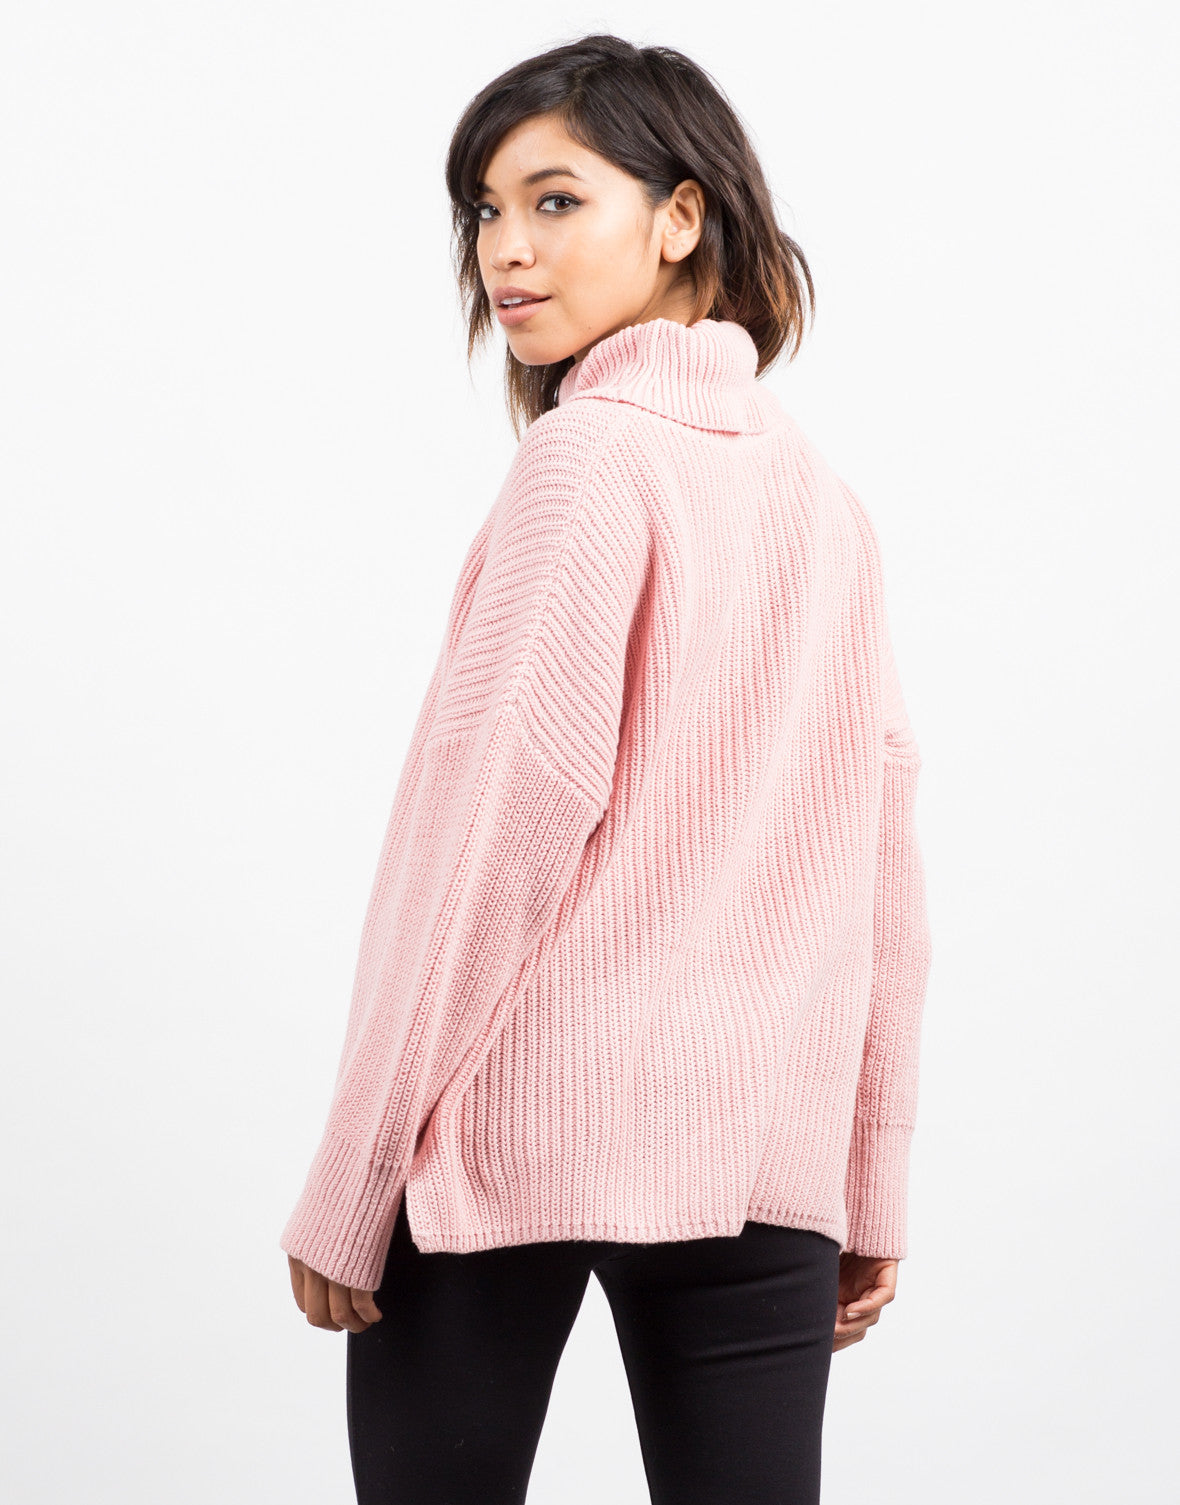 Oversized Turtleneck Sweater  Pink Top Knit Sweater  